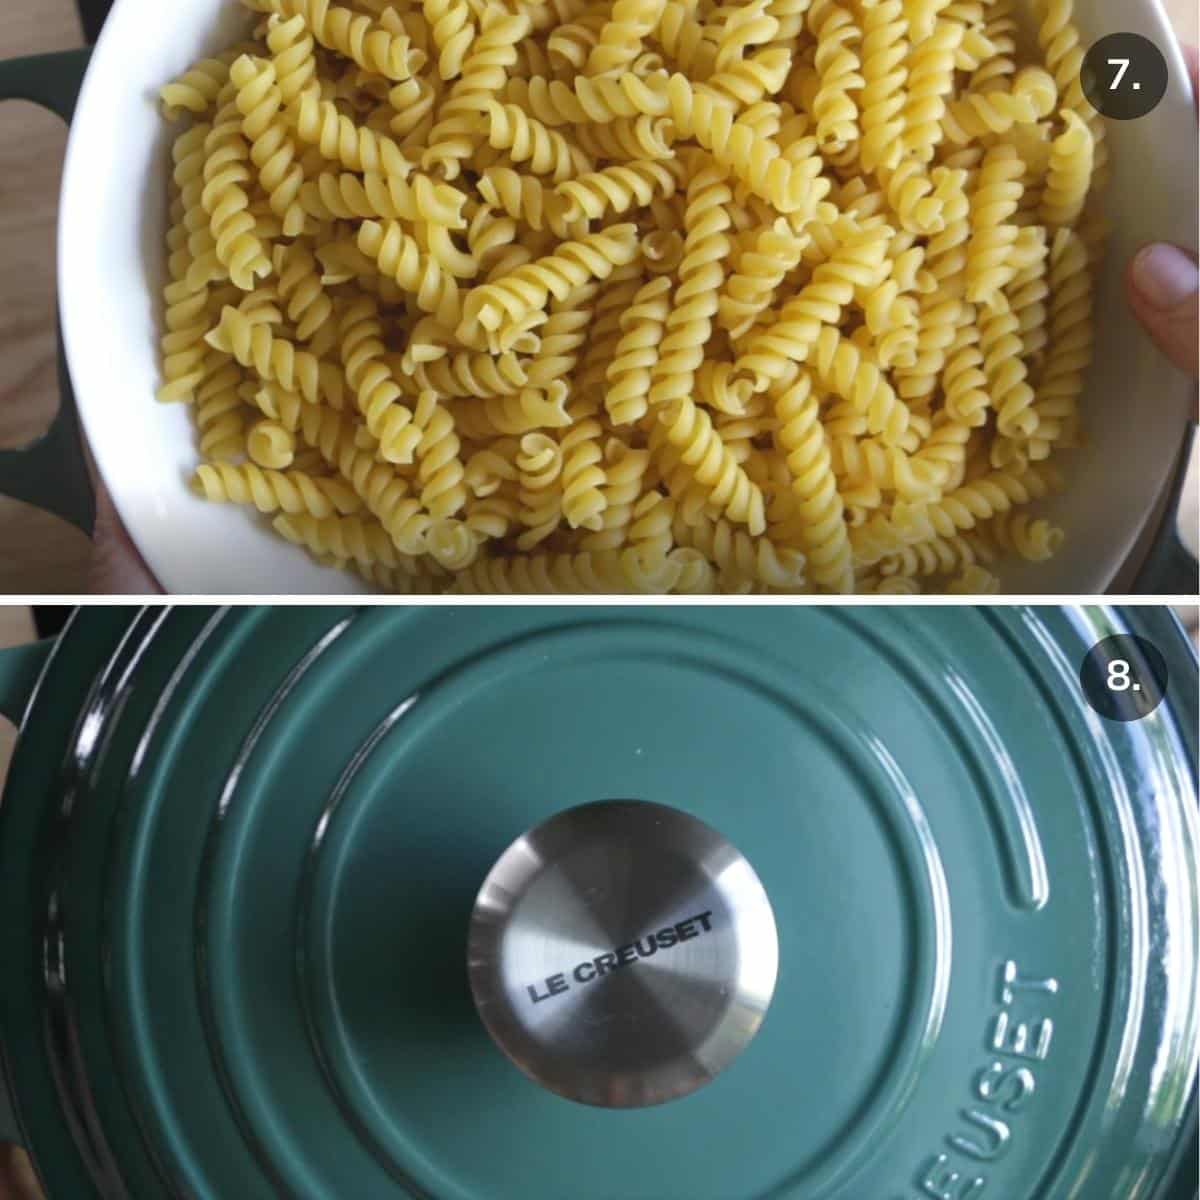 Pasta added to pot and lid placed on.